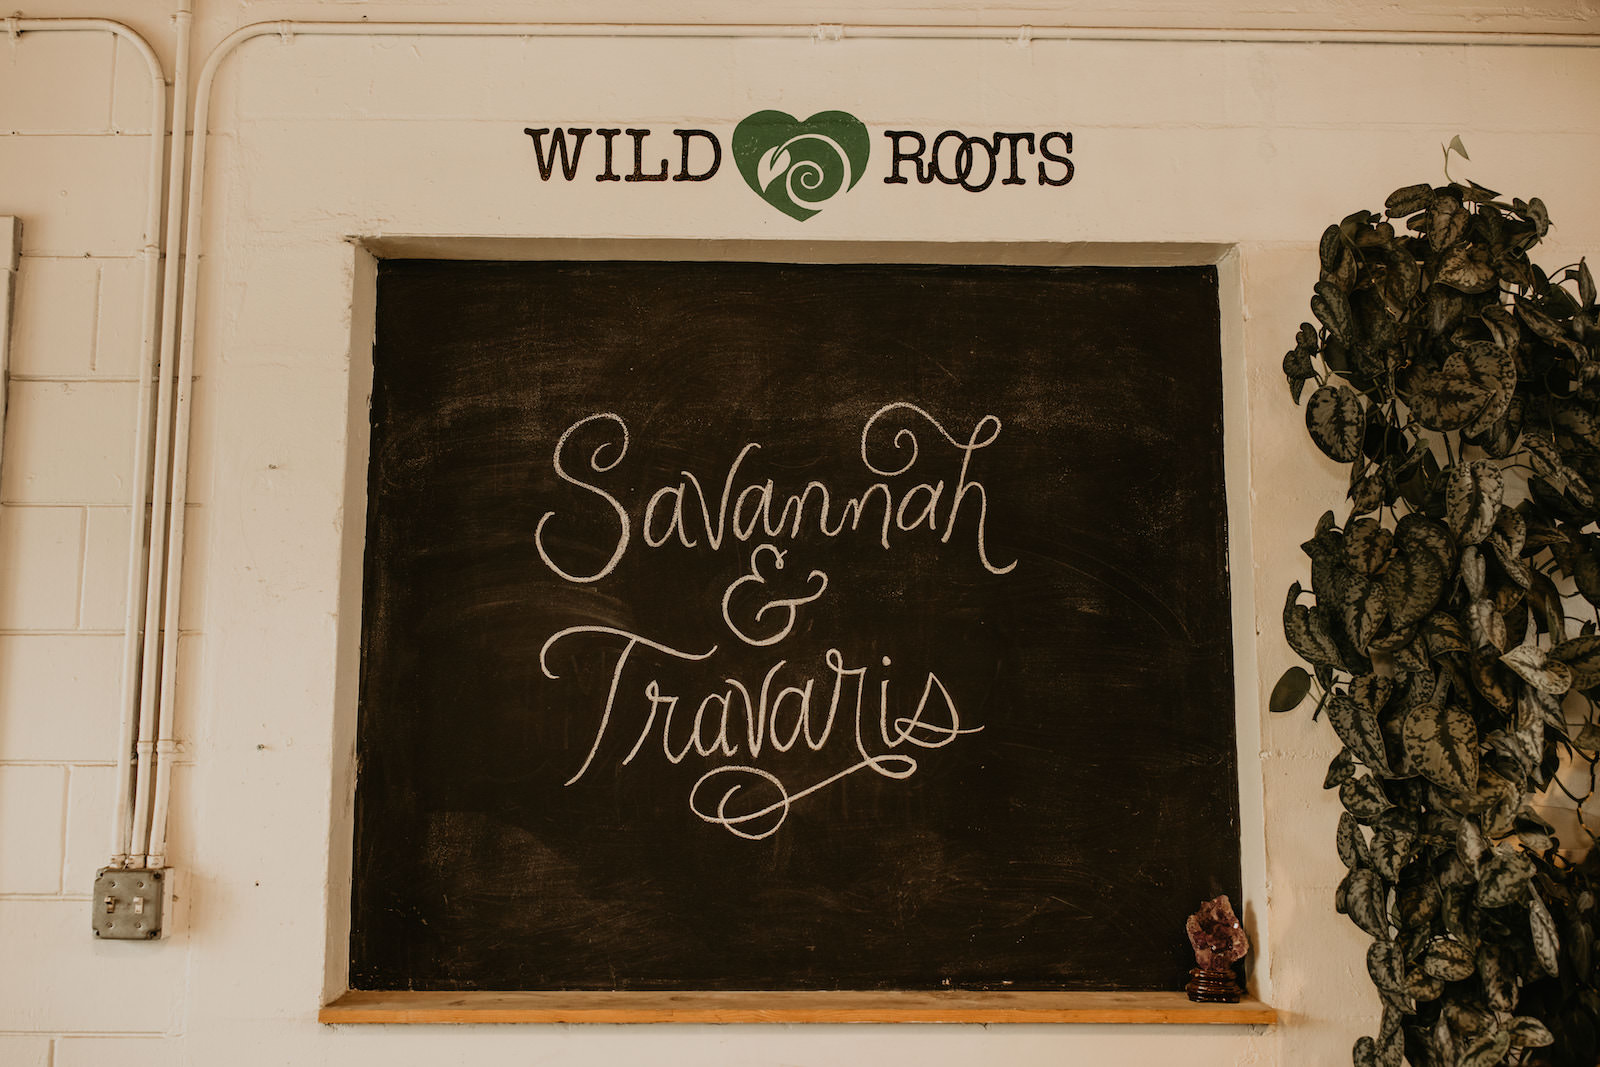 Intimate Elopement Wedding, Chalkboard with Bride and Groom Script Names | Tampa Bay Wedding Planner Elope Tampa Bay | Wedding Venue Wild Roots